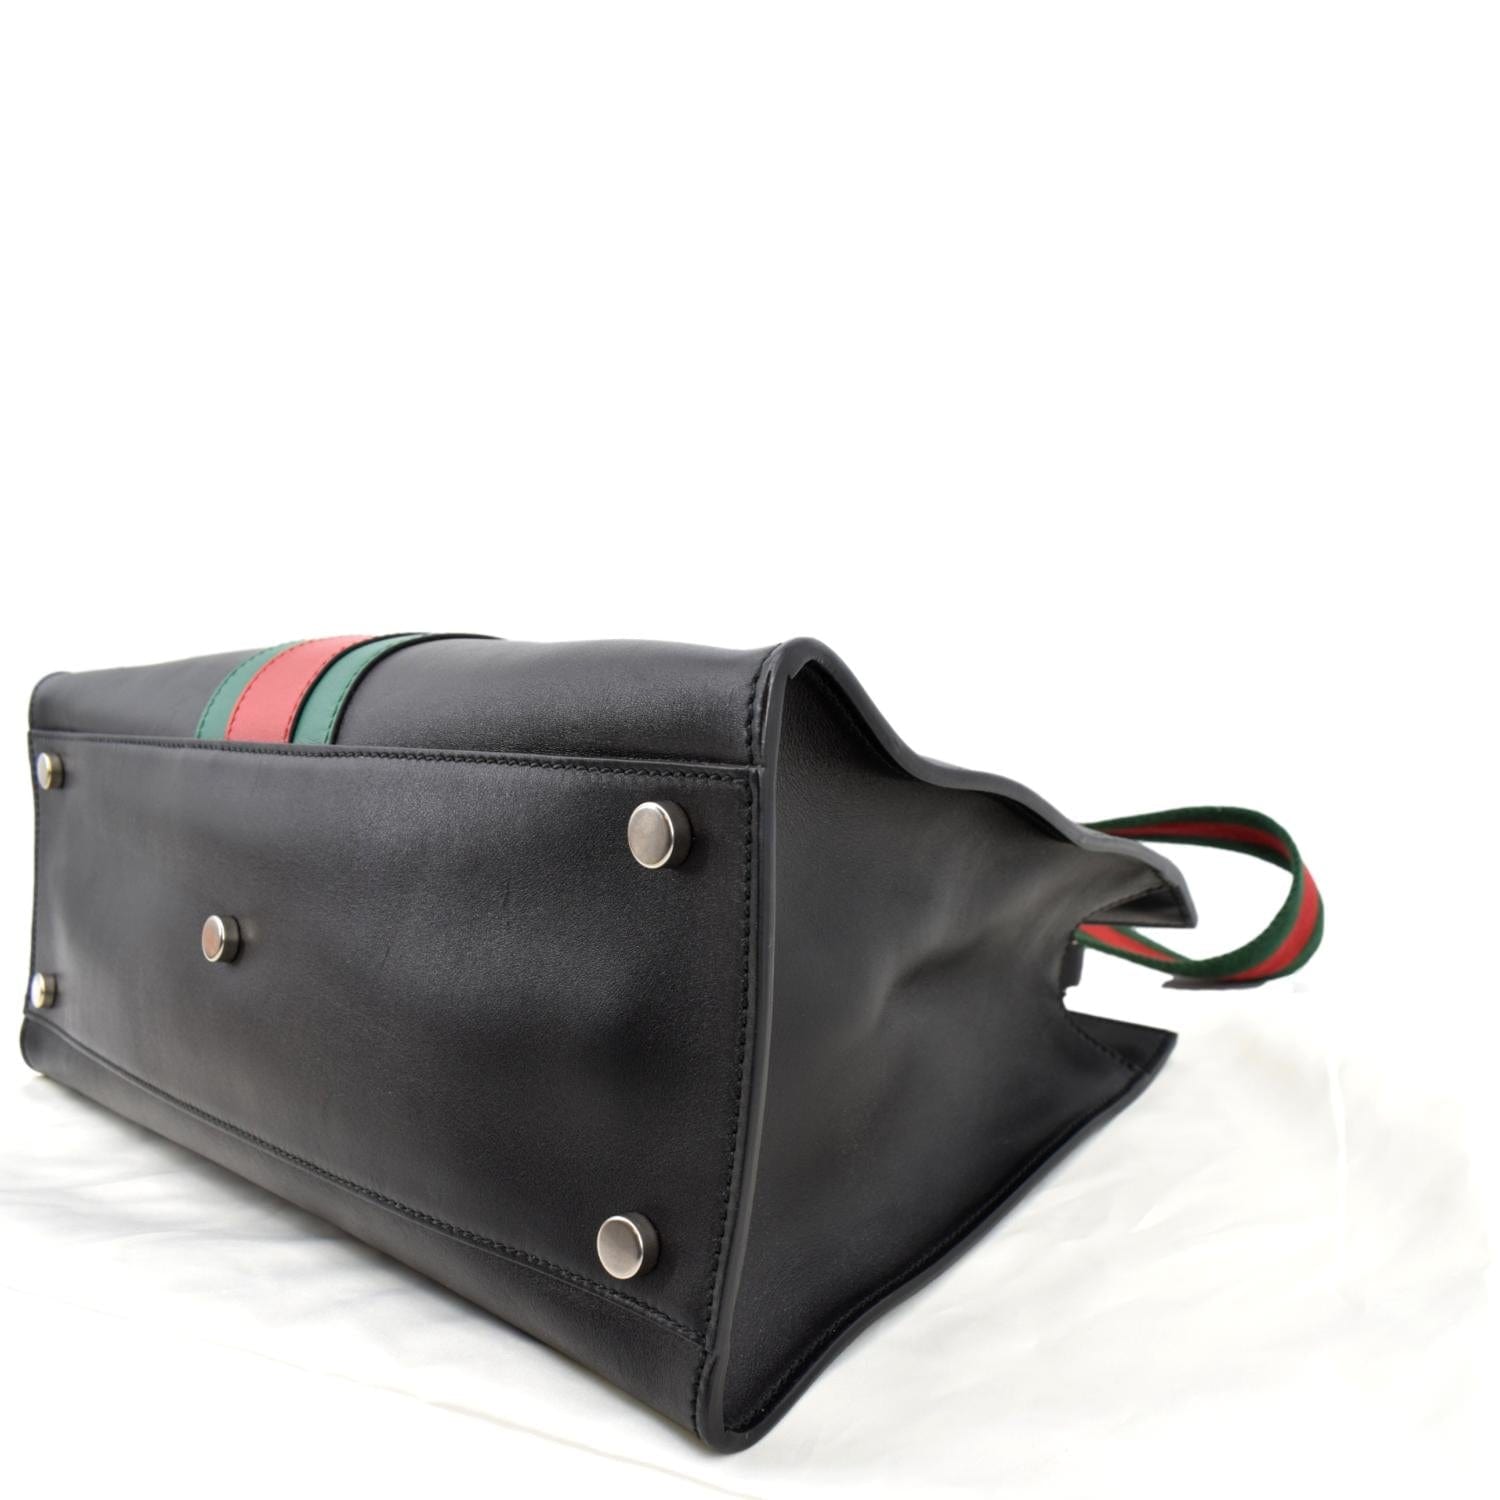 Gucci Dionysus Leather Tote Bag in Black Color